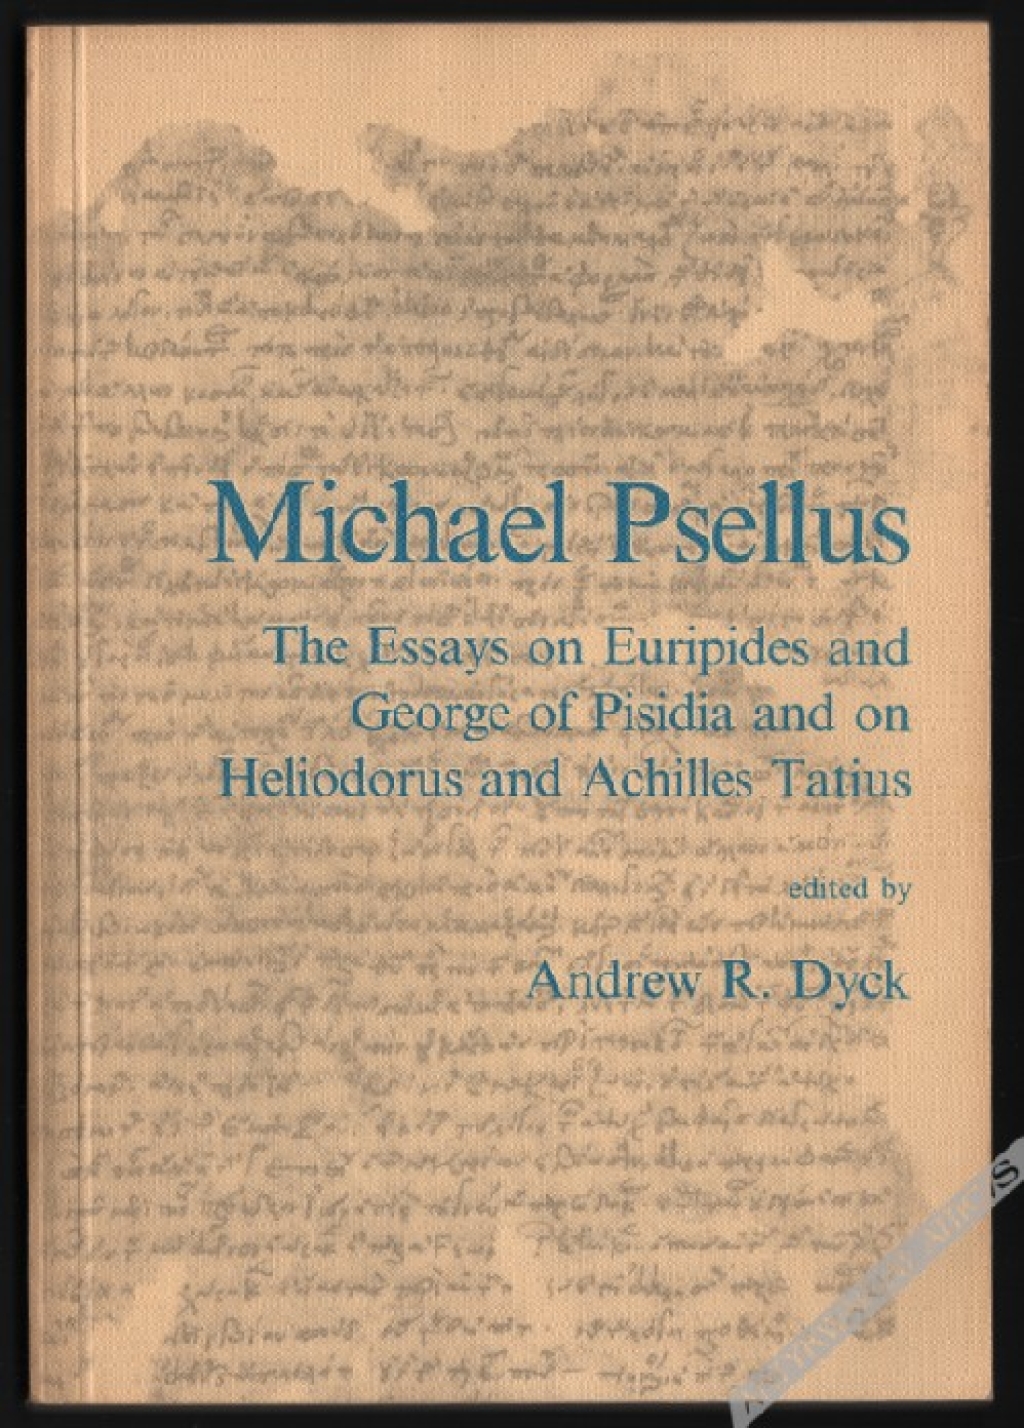 The Essays on Euripides and George of Pisidia and on Heliodorus and Achilles Tatius